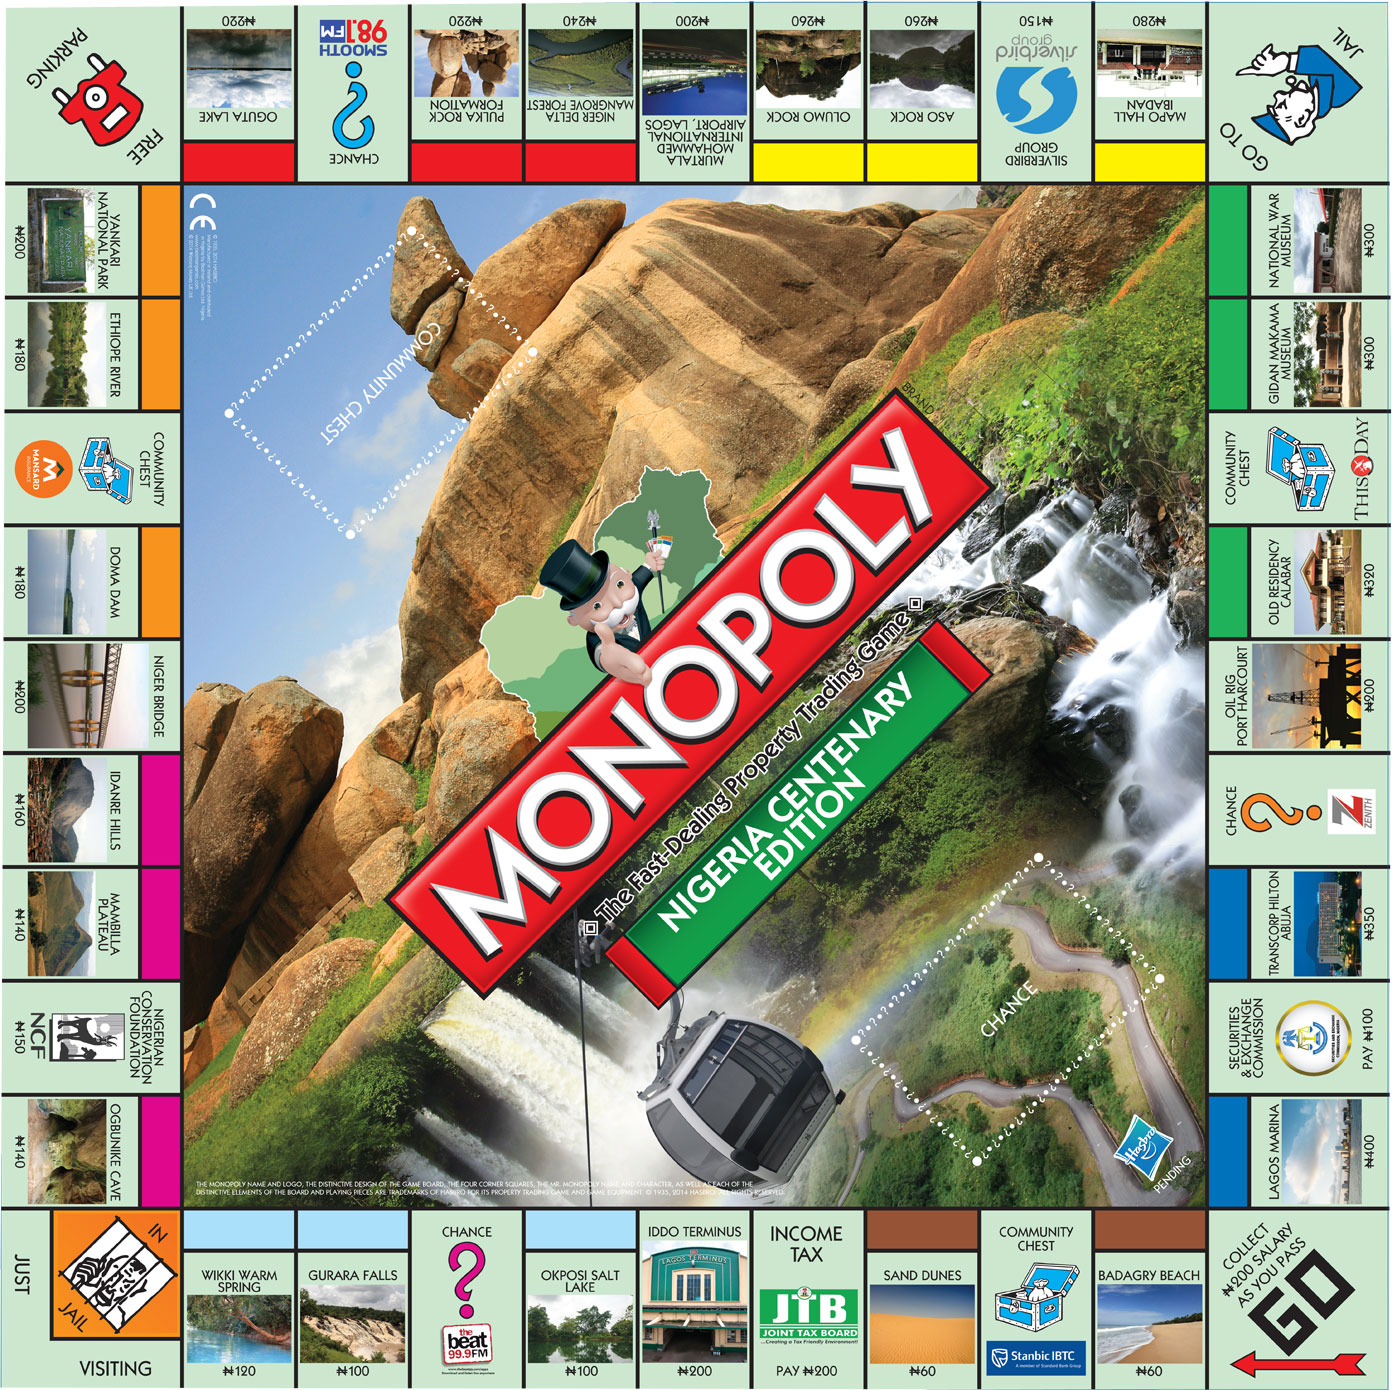 City of Lagos Monopoly Board Game 